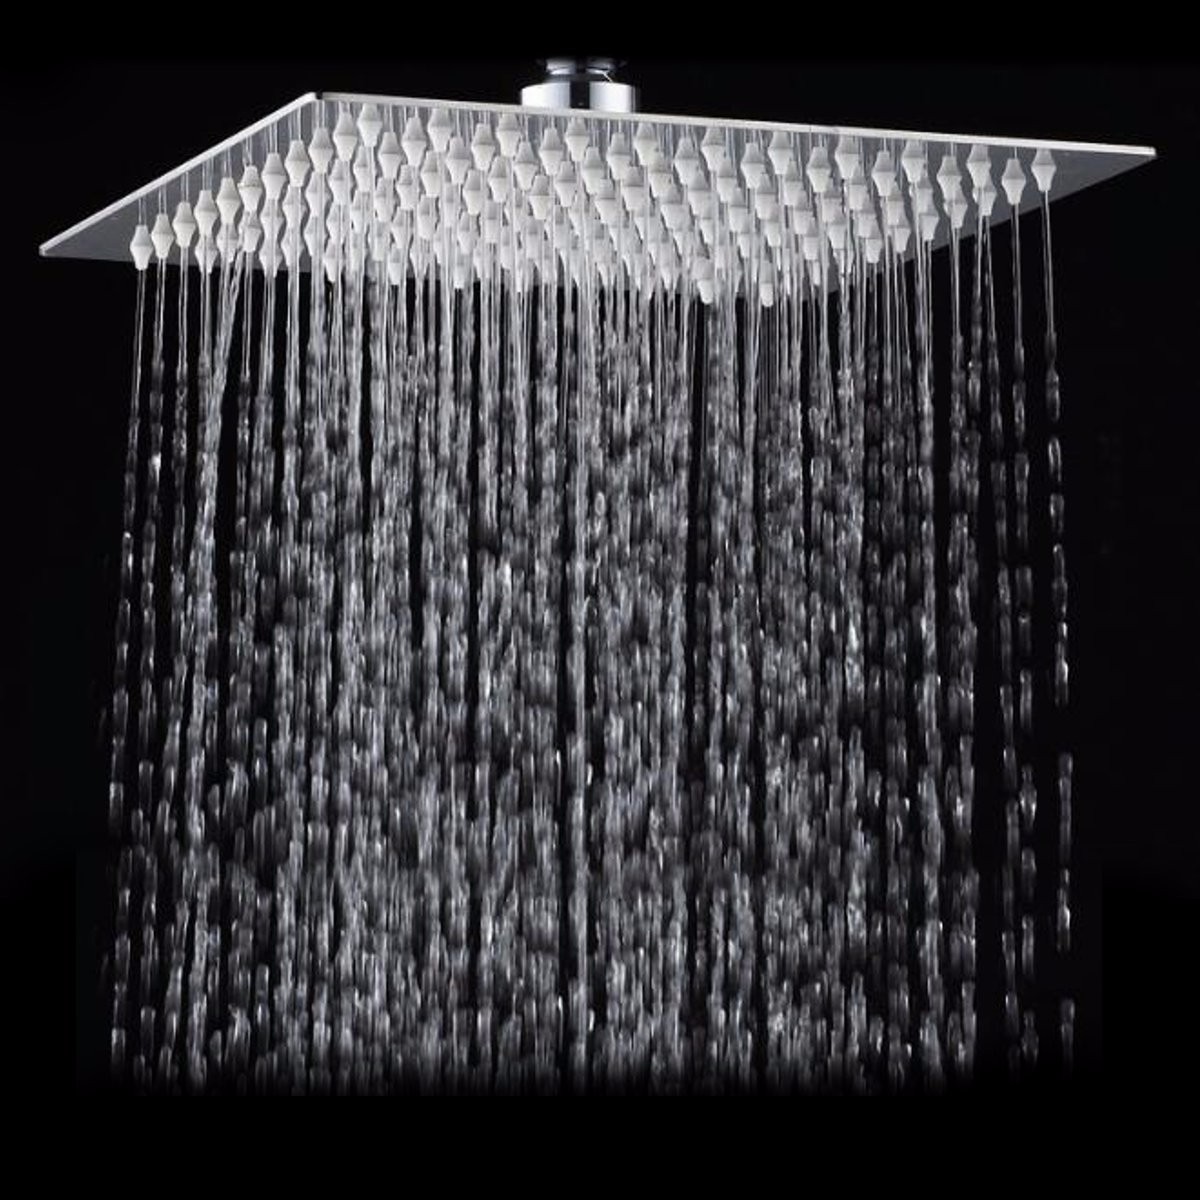 

15x15cm 6 Inch Square Water-saving Pressurized Top Spray Shower Head 201 Stainless Steel